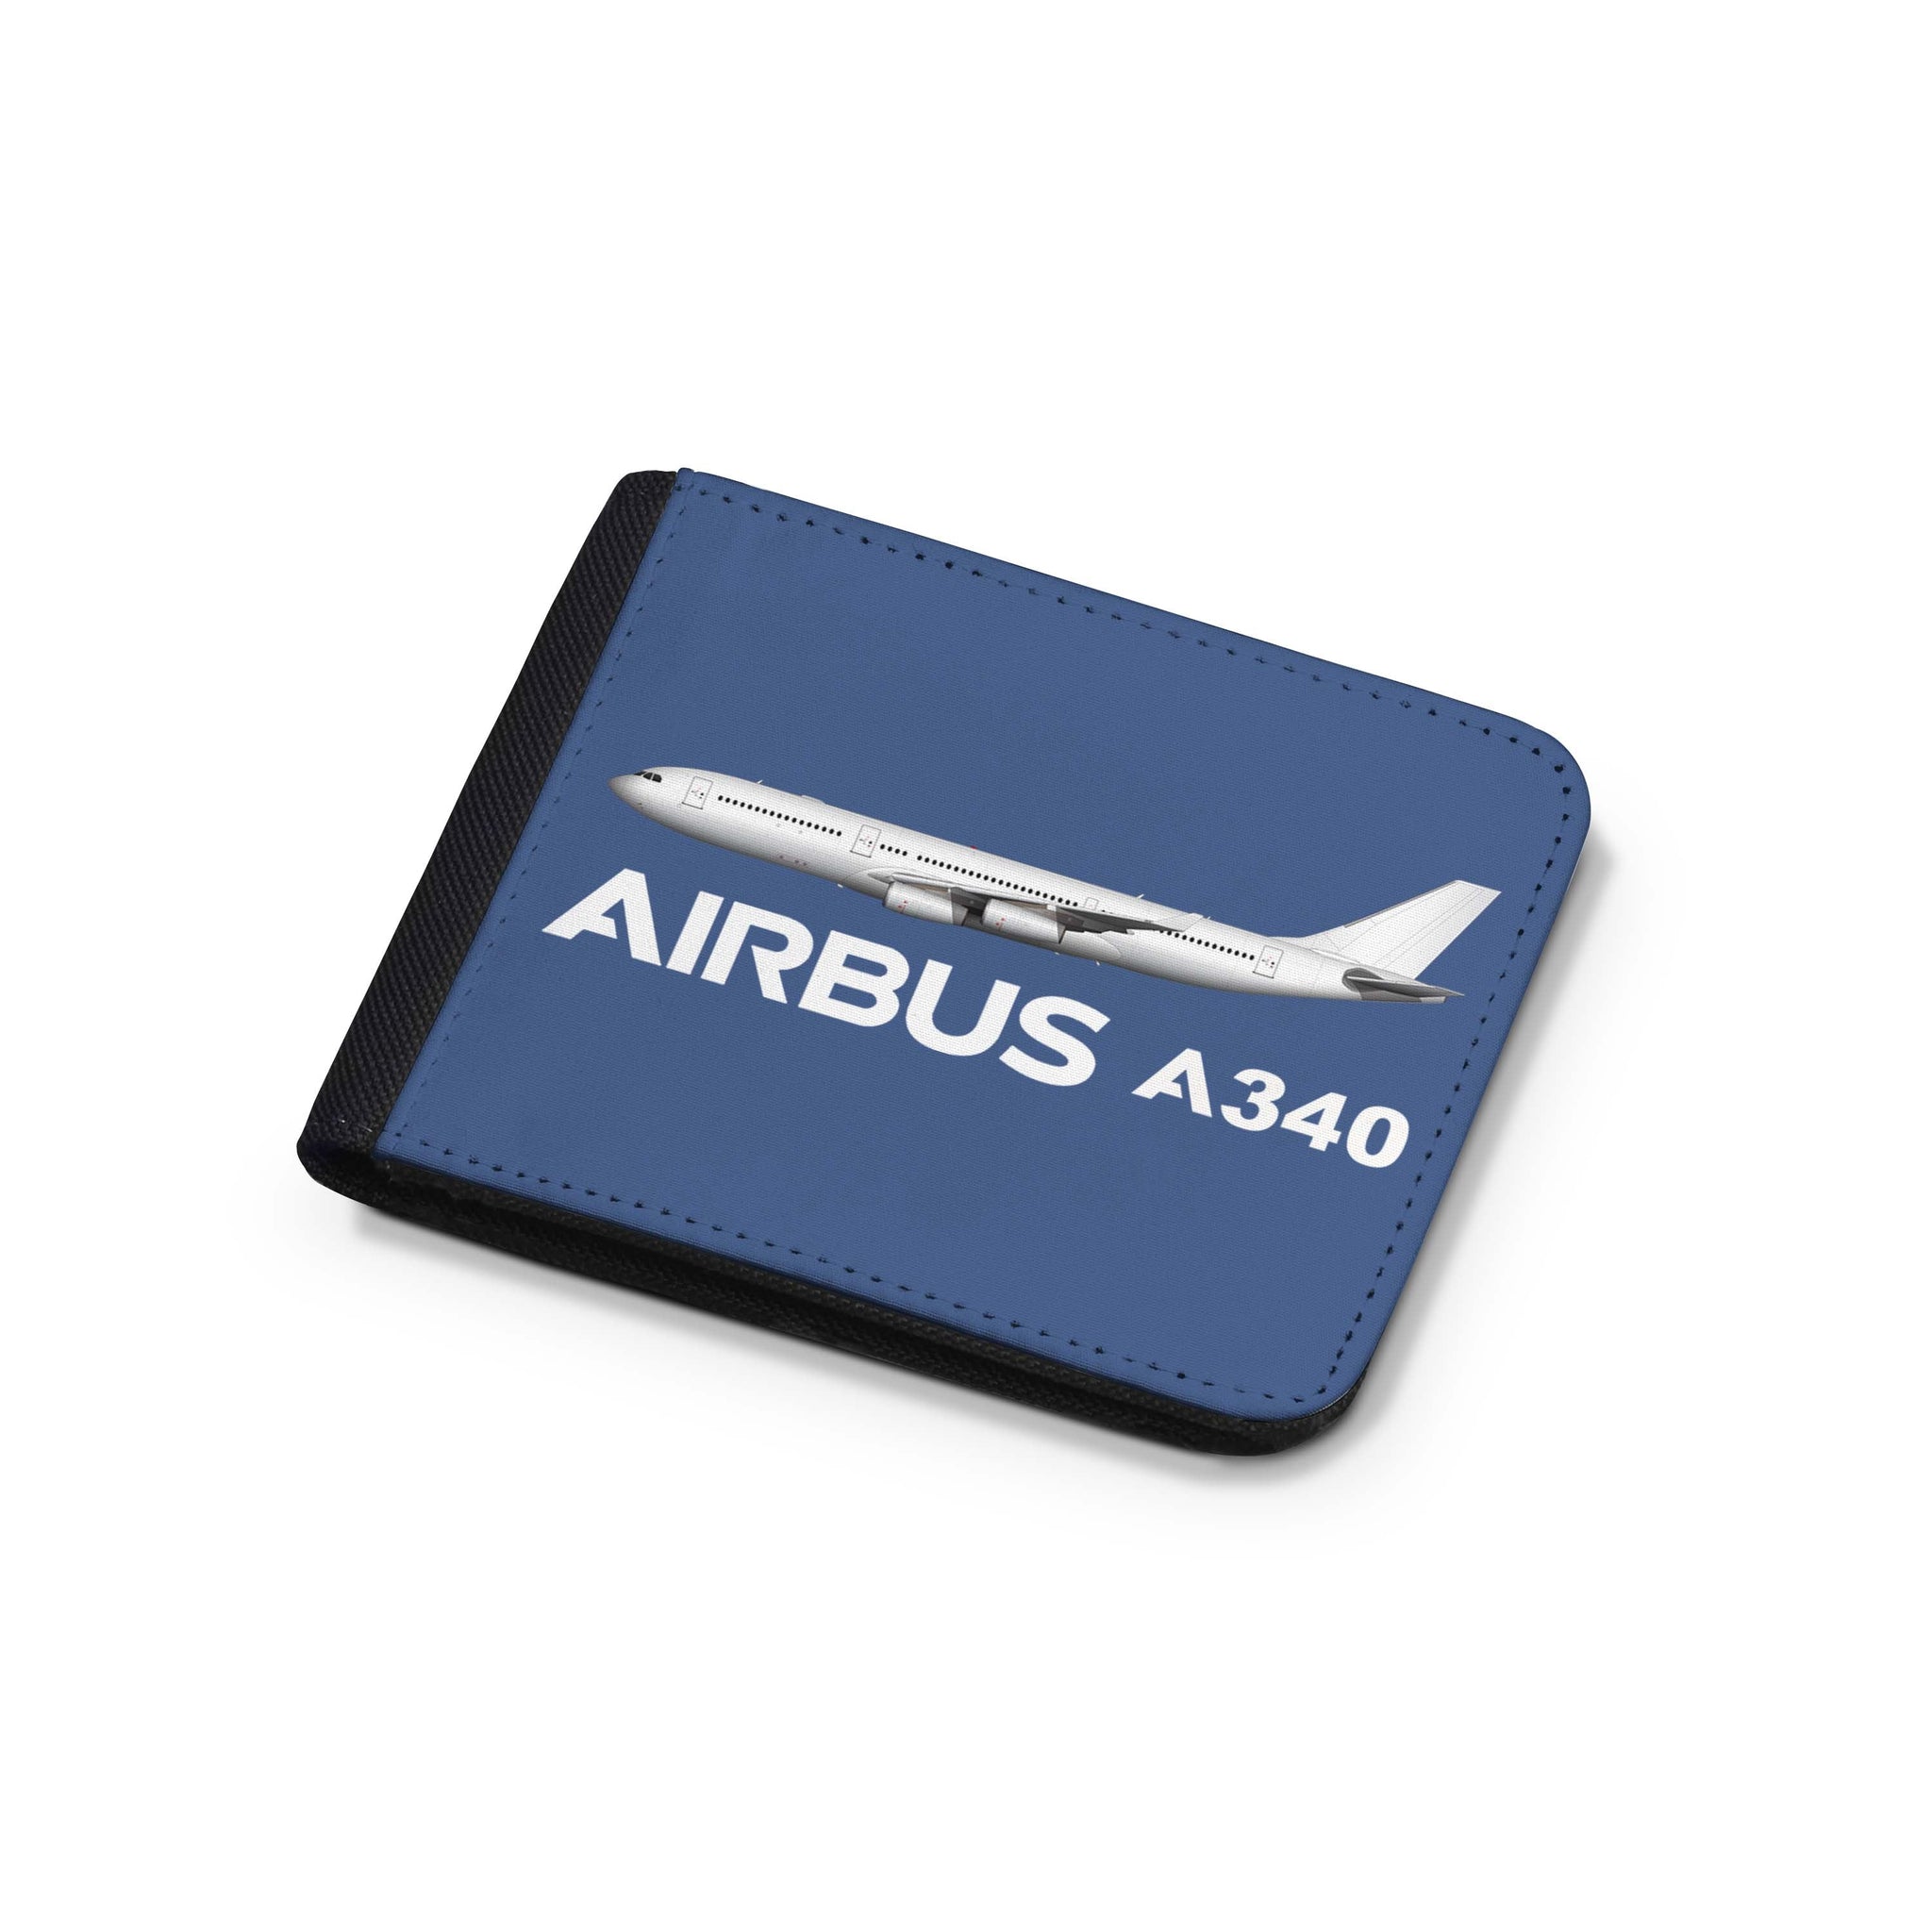 The Airbus A340 Designed Wallets